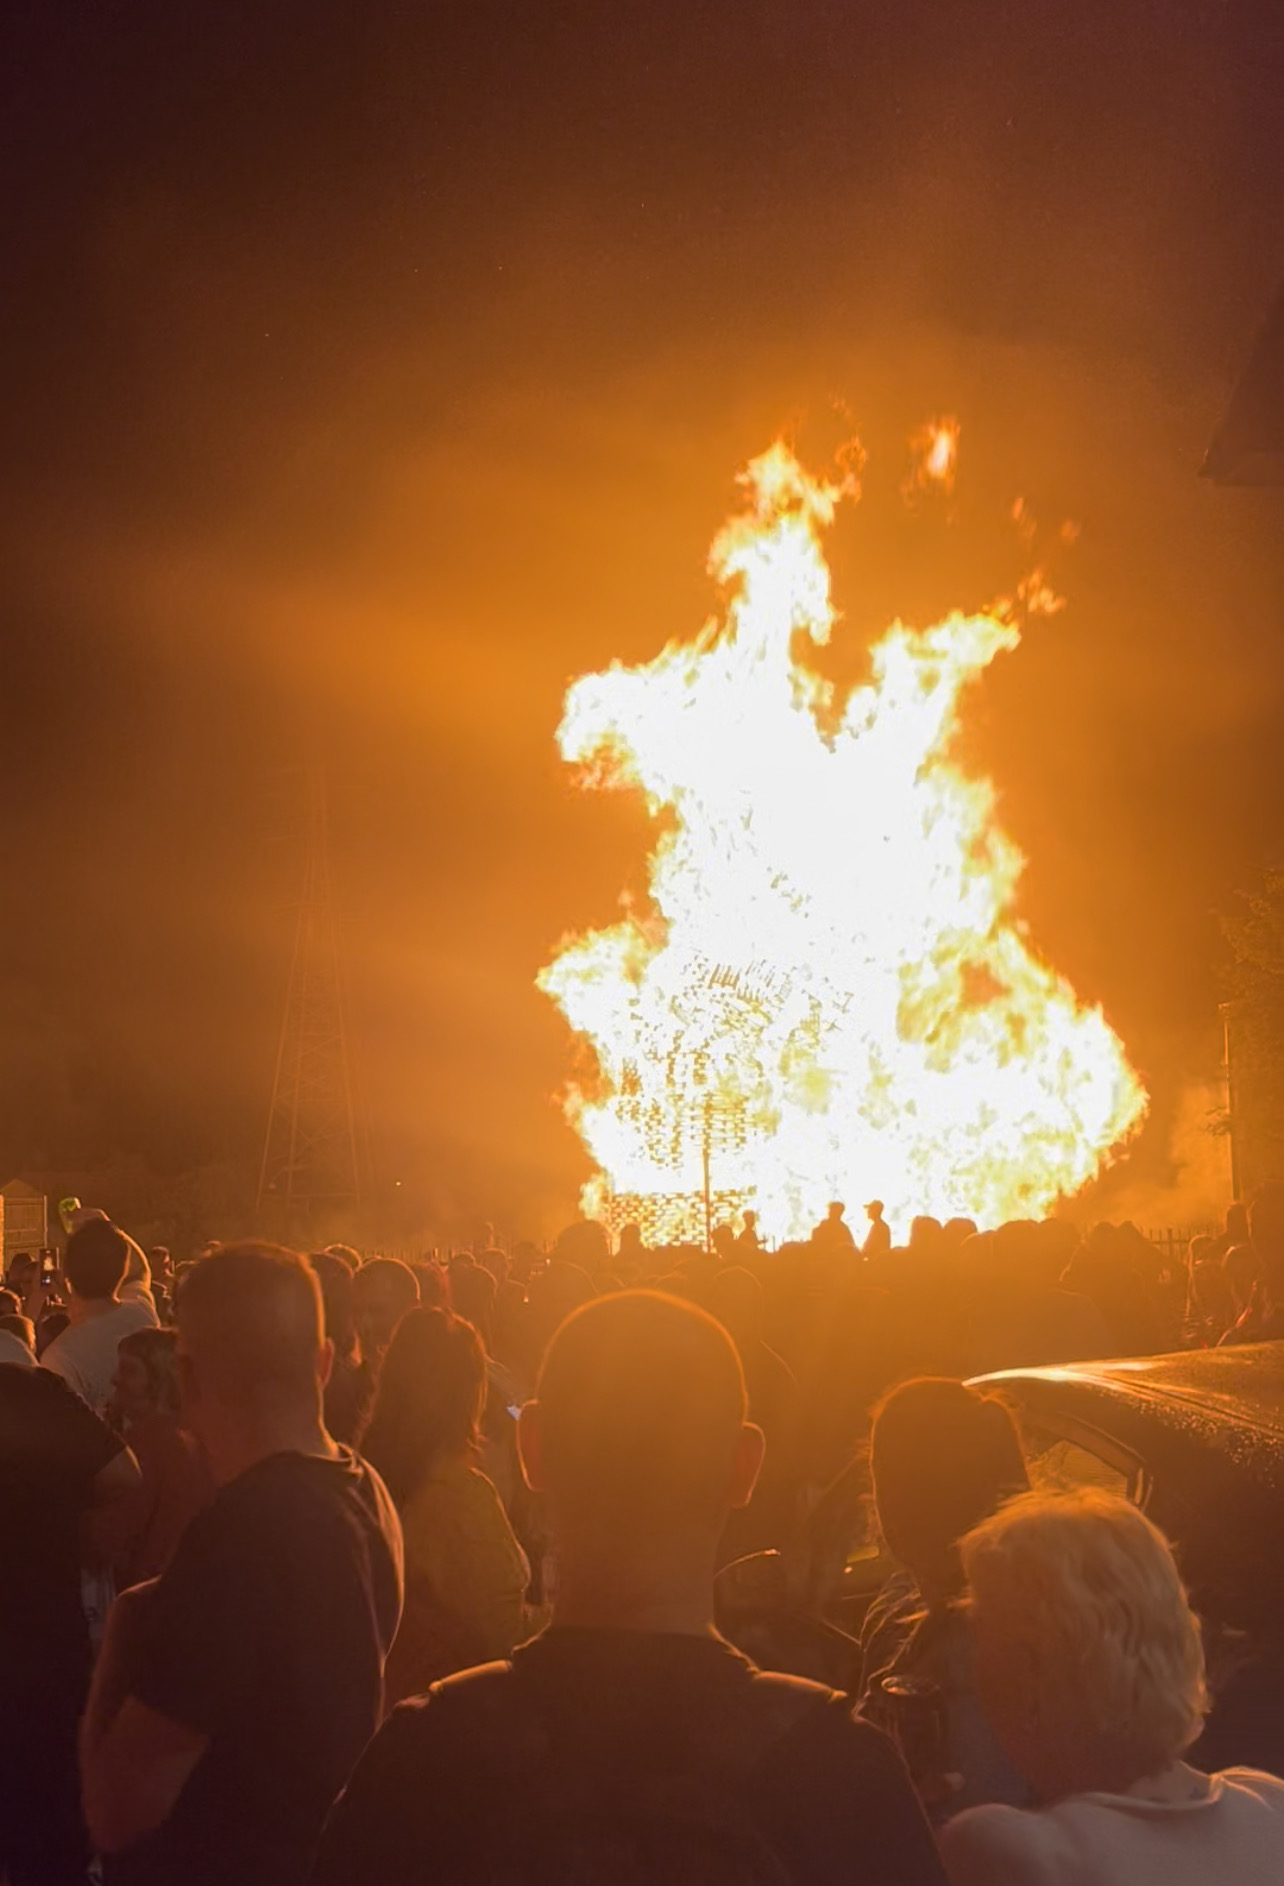 An eleventh night bonfire rages in Belfast. Image: Barry Whyte/Newstalk